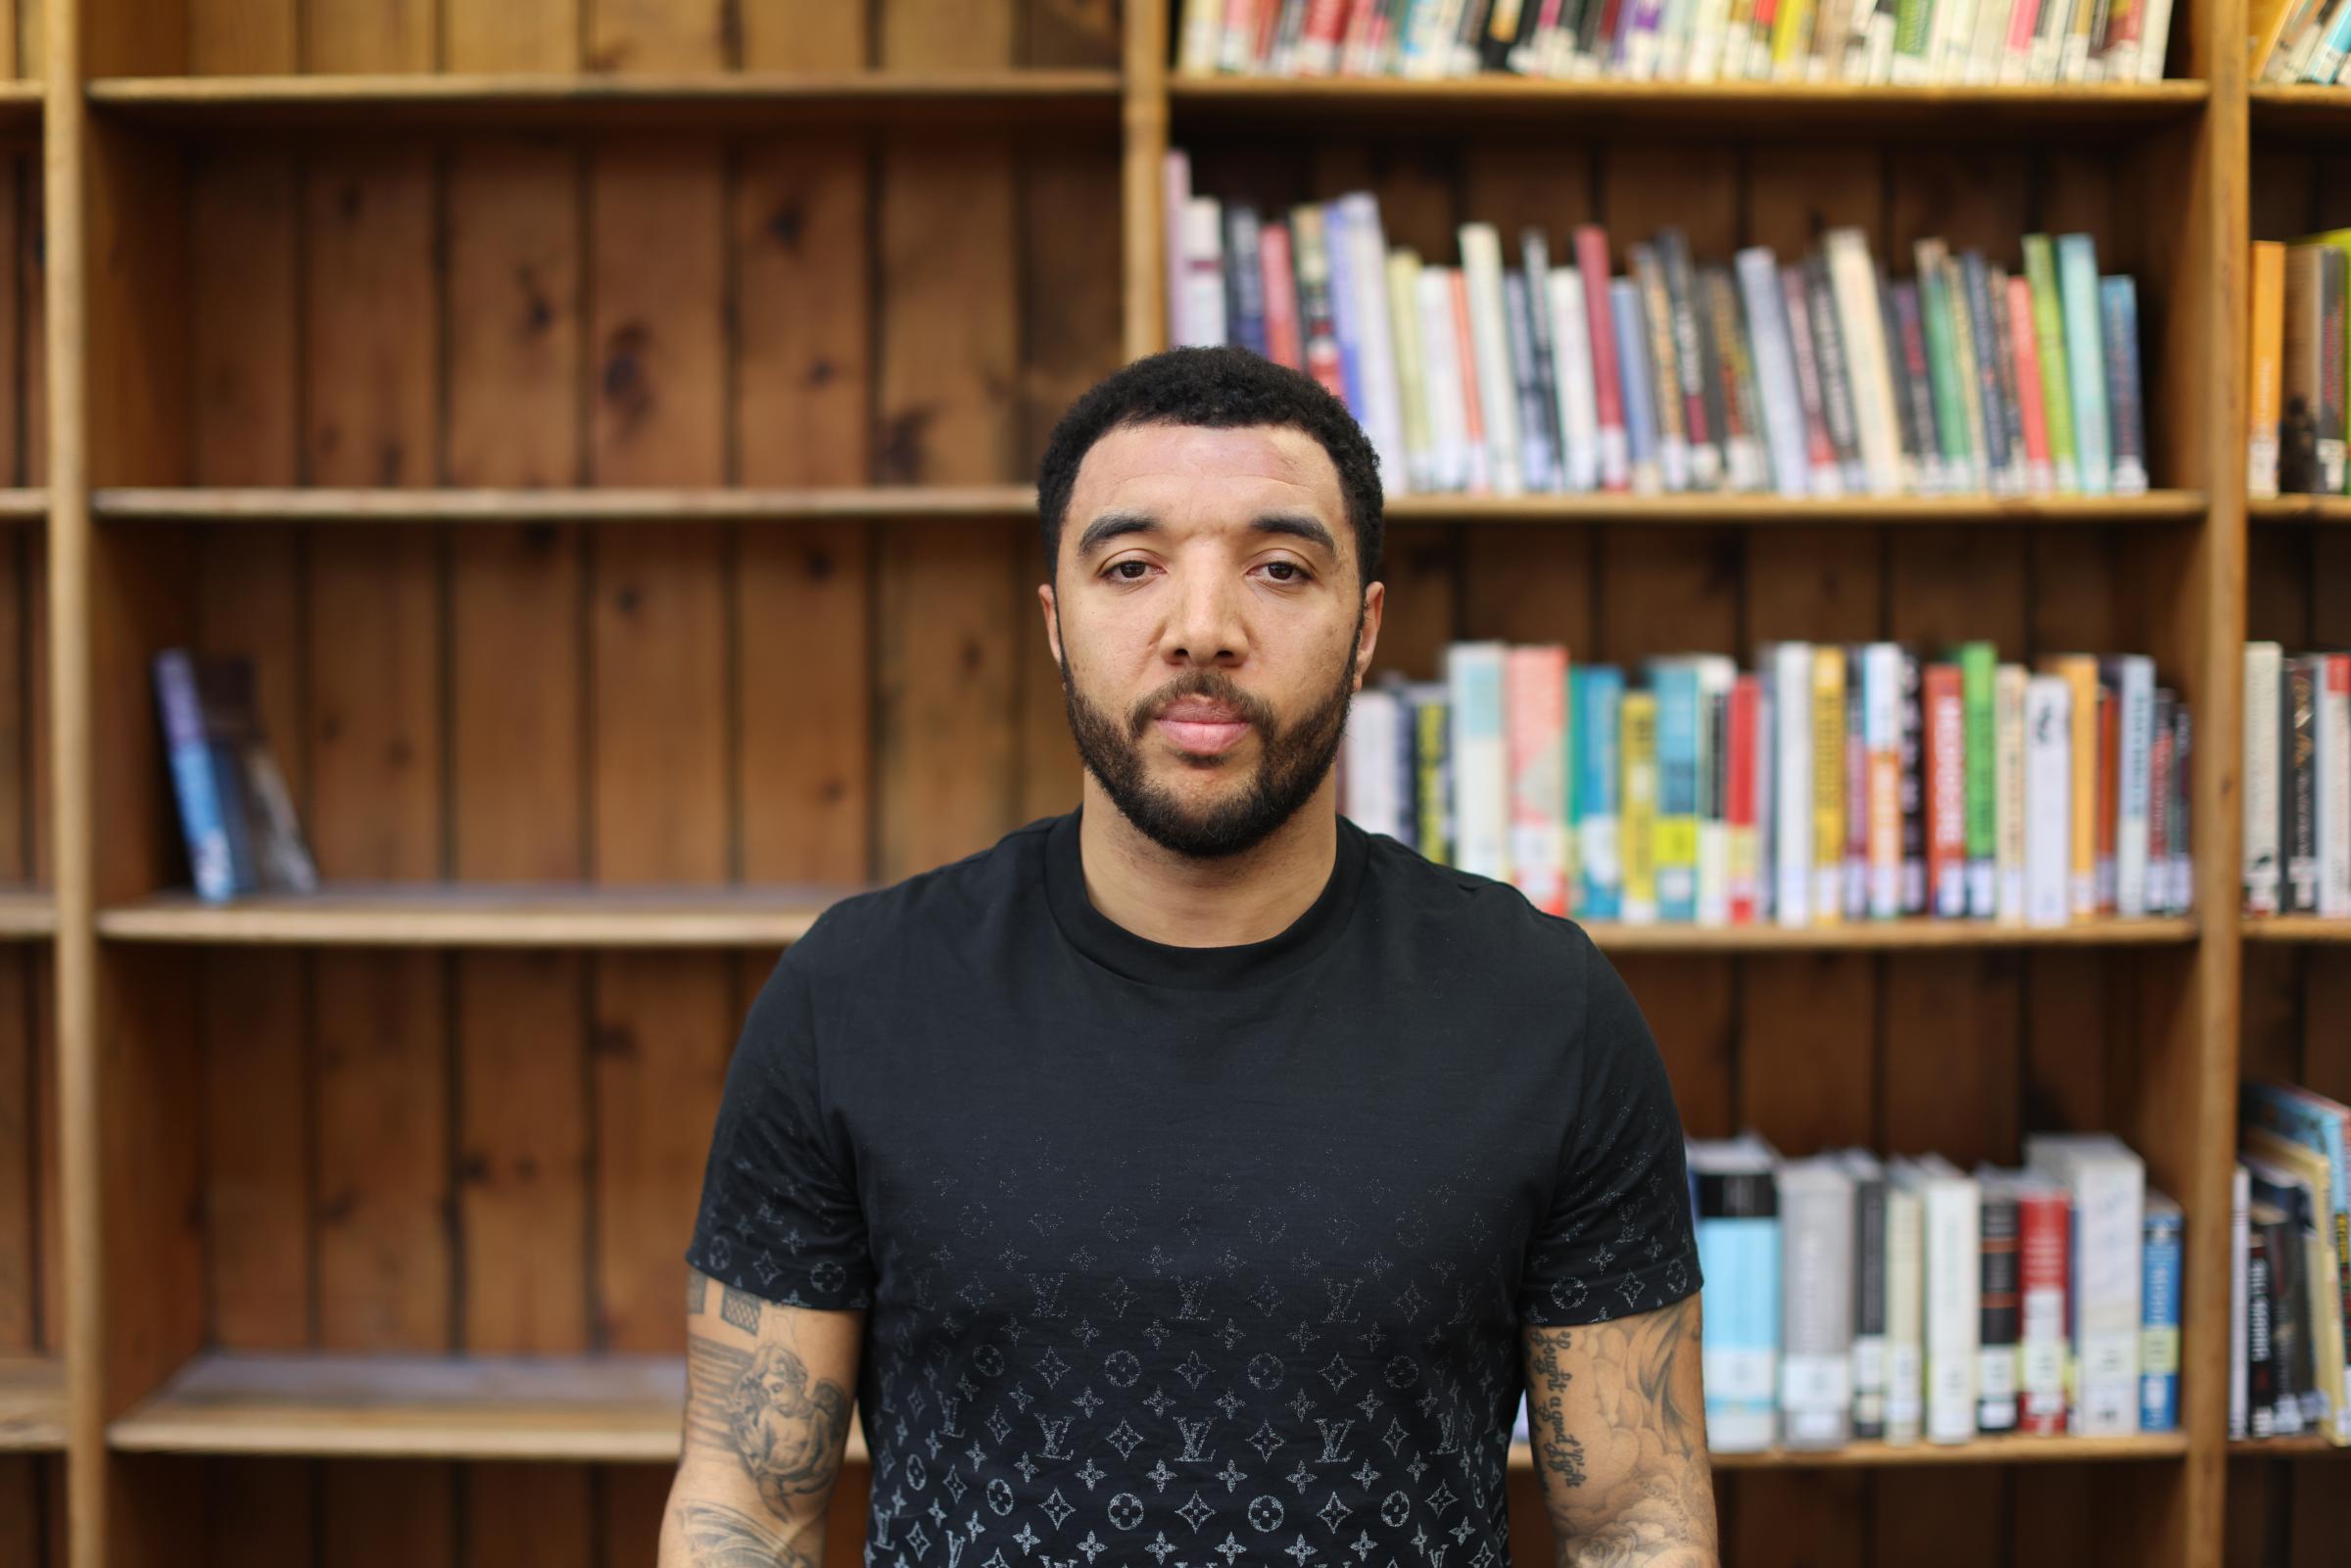 Troy Deeney will be the subject of a new Channel 4 documentary. Credit: PA